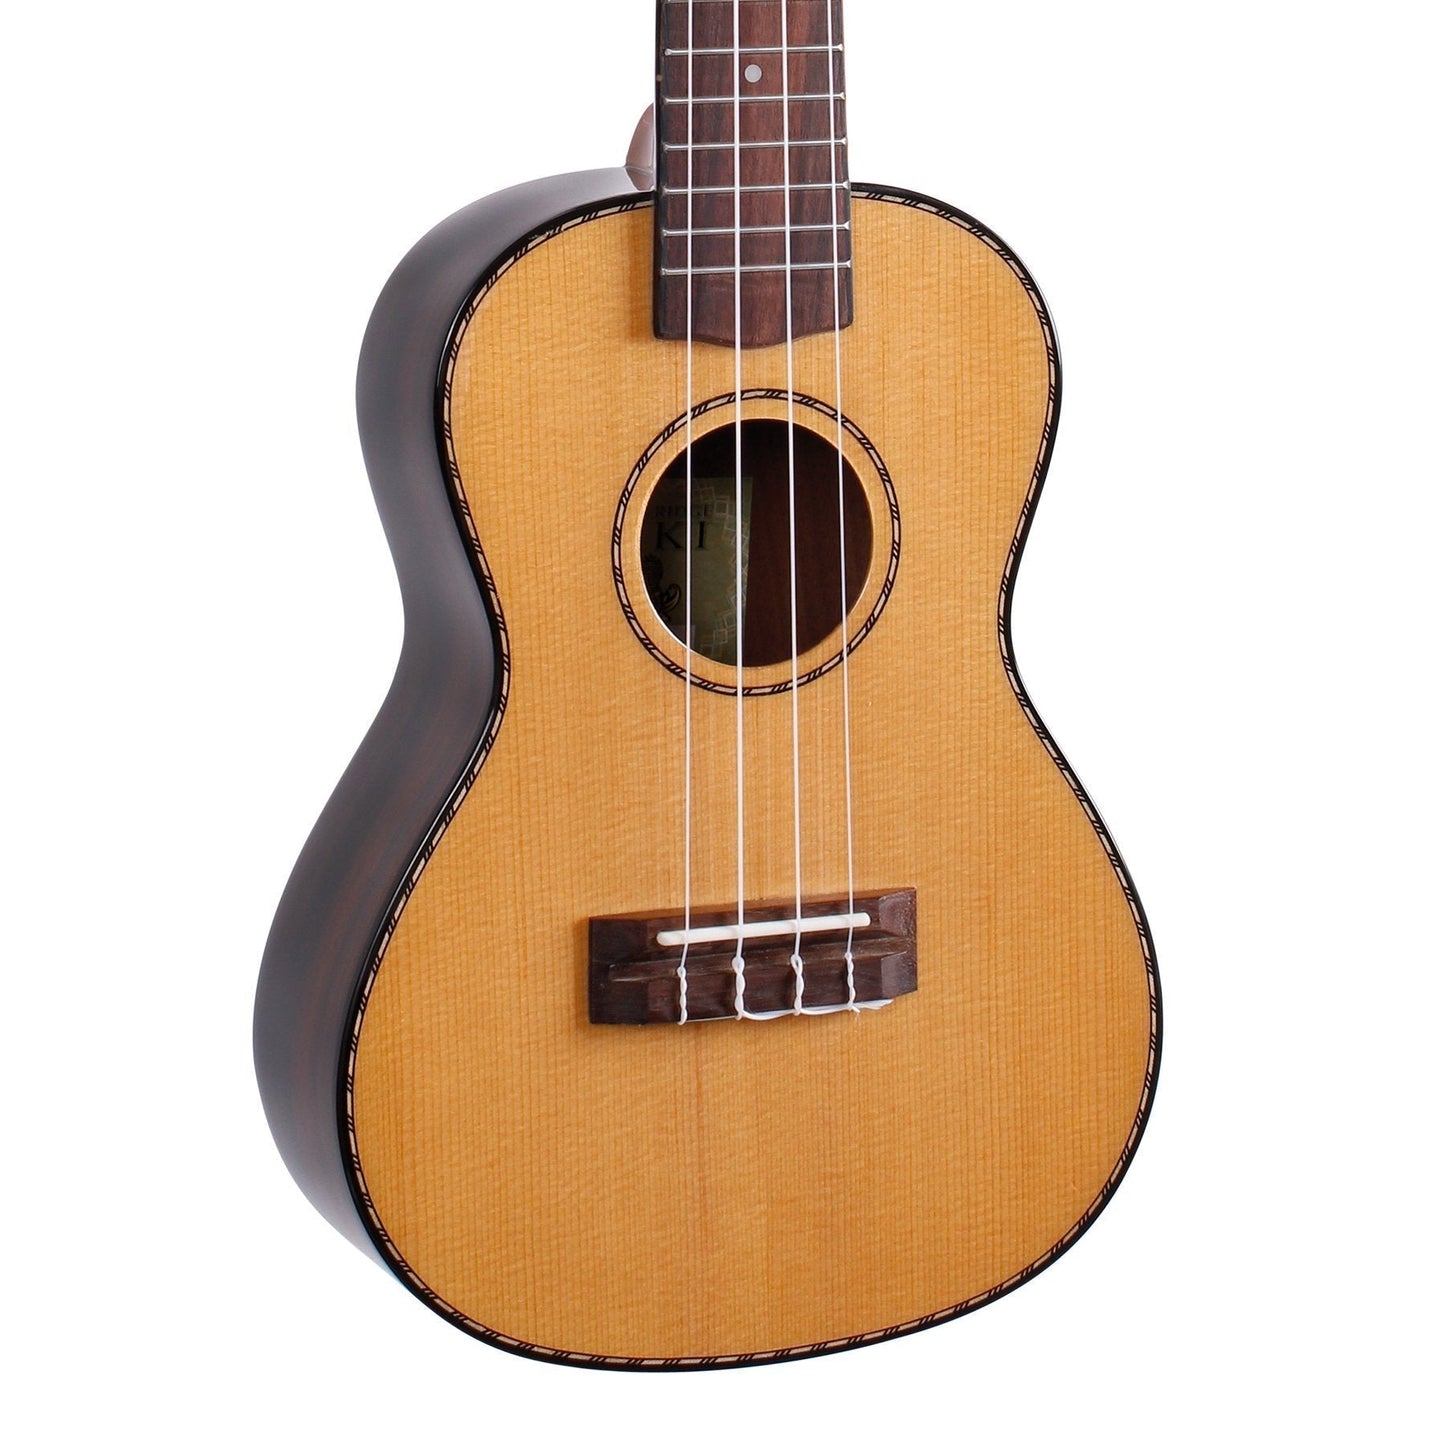 Tiki '22 Series' Spruce Solid Top Concert Ukulele with Hard Case (Natural Gloss)